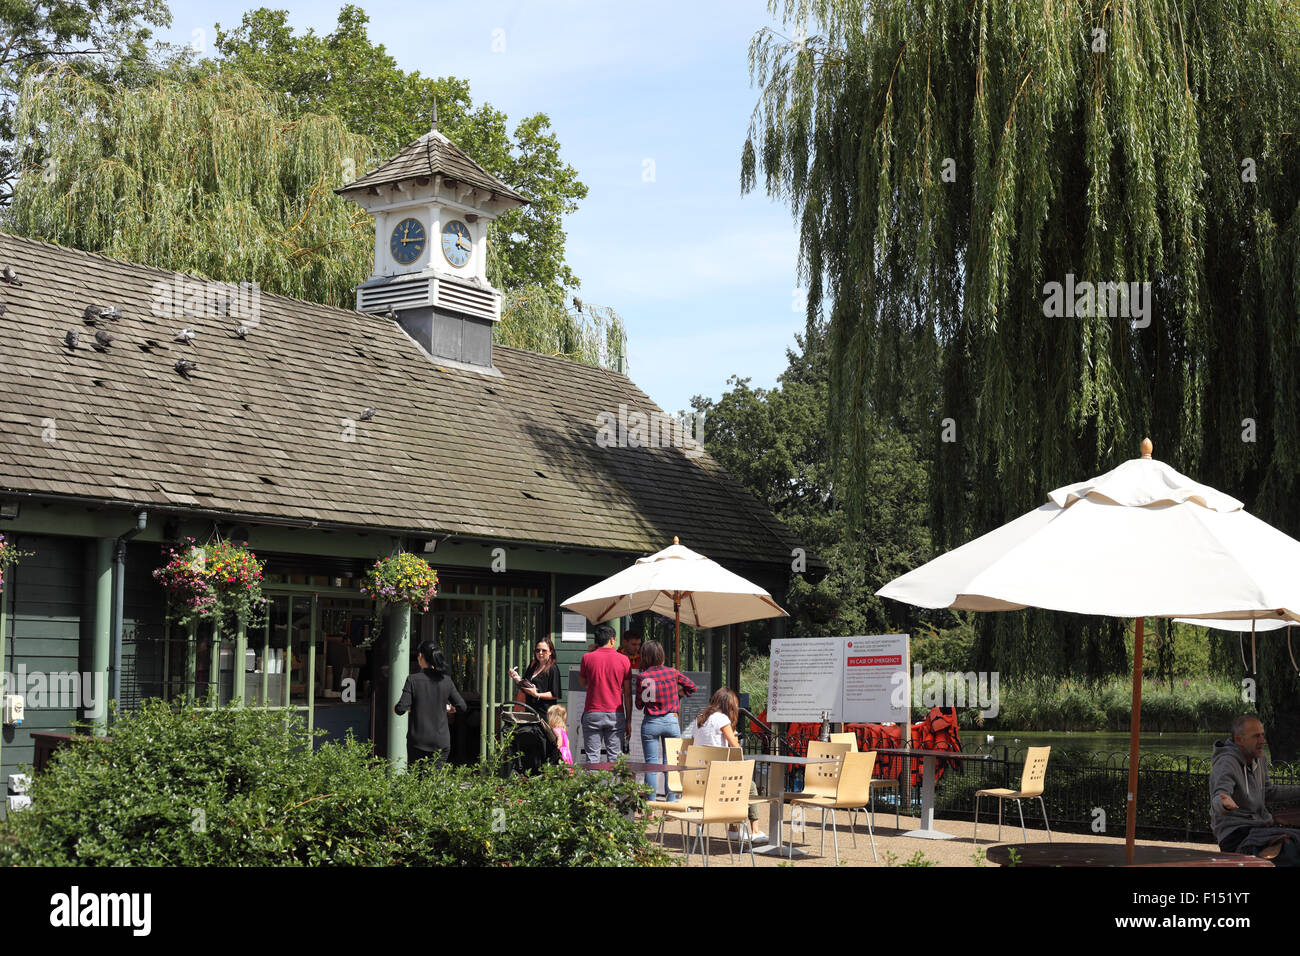 The Boathouse cafe in natural settings in Regent's Park, central London, UK Stock Photo